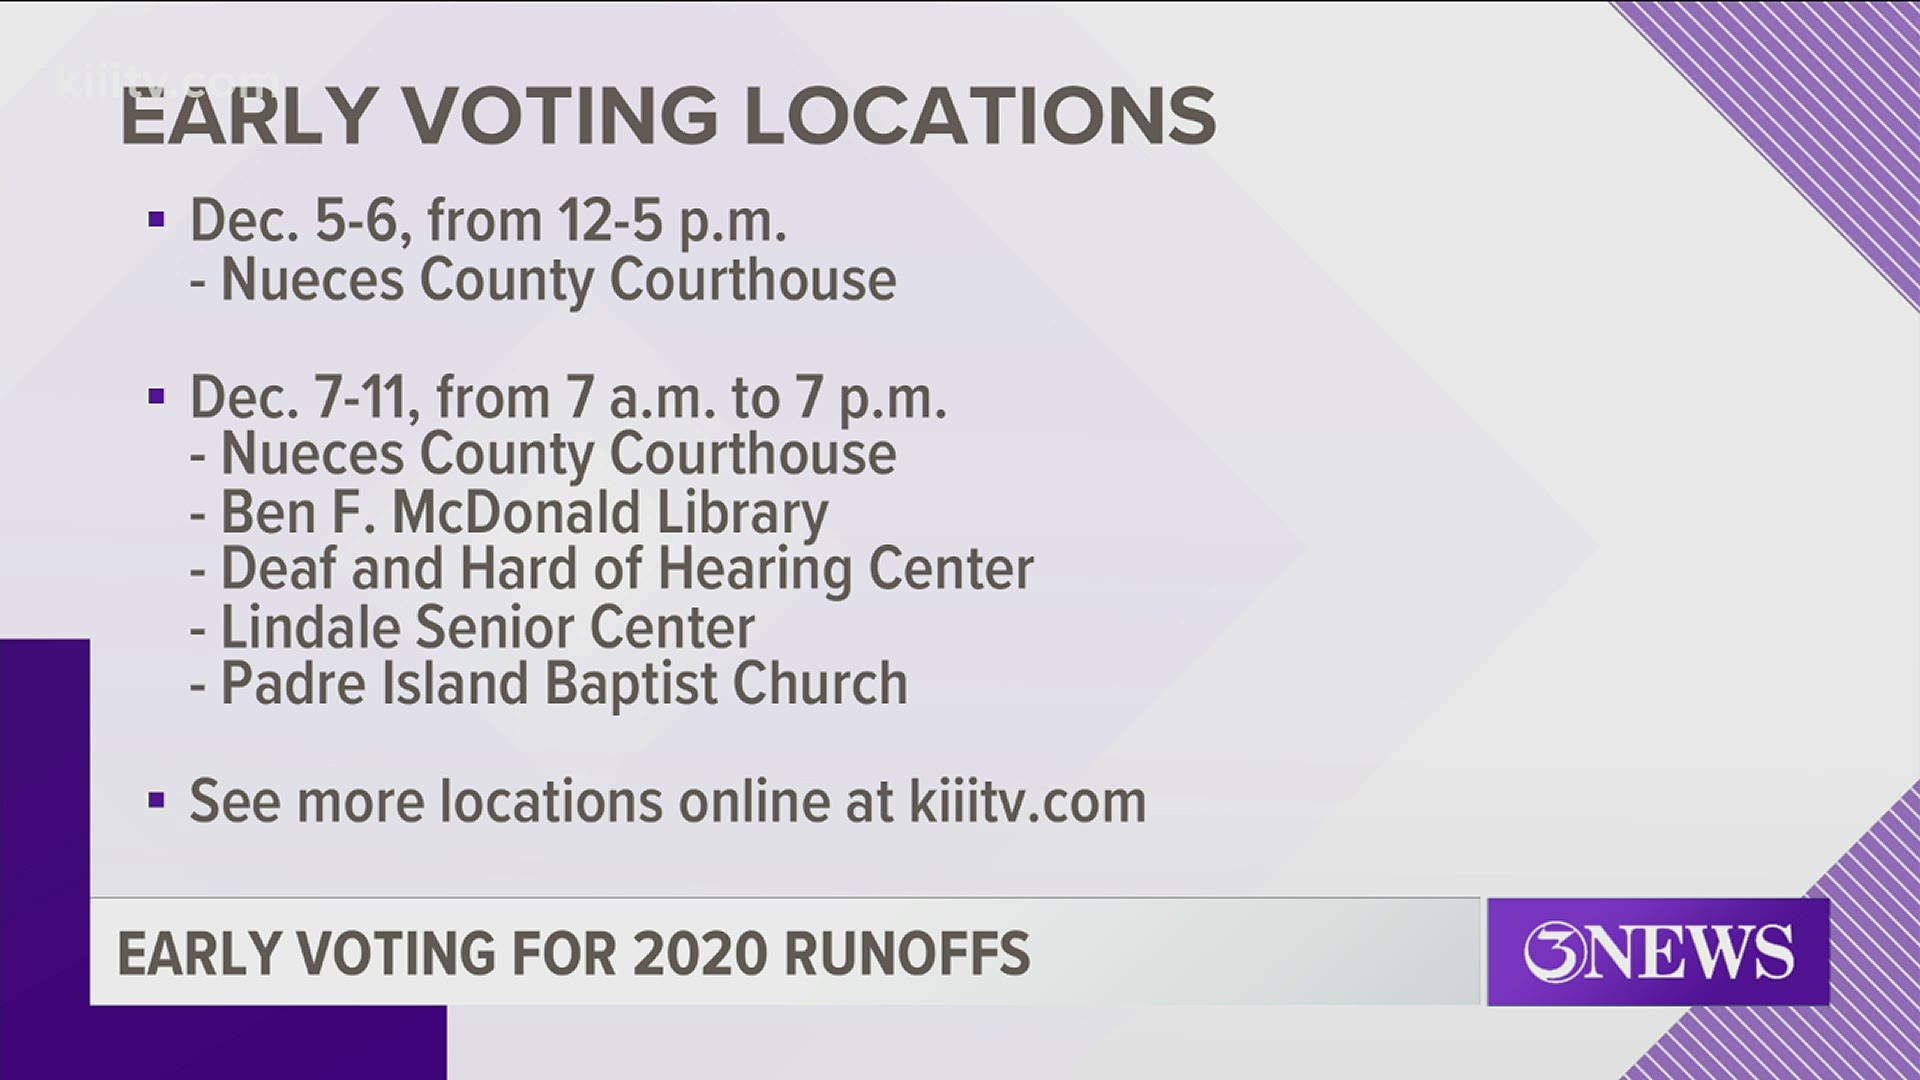 The runoff election will decide on a Corpus Christi Mayor and City Council Members in Districts 1 and 4.